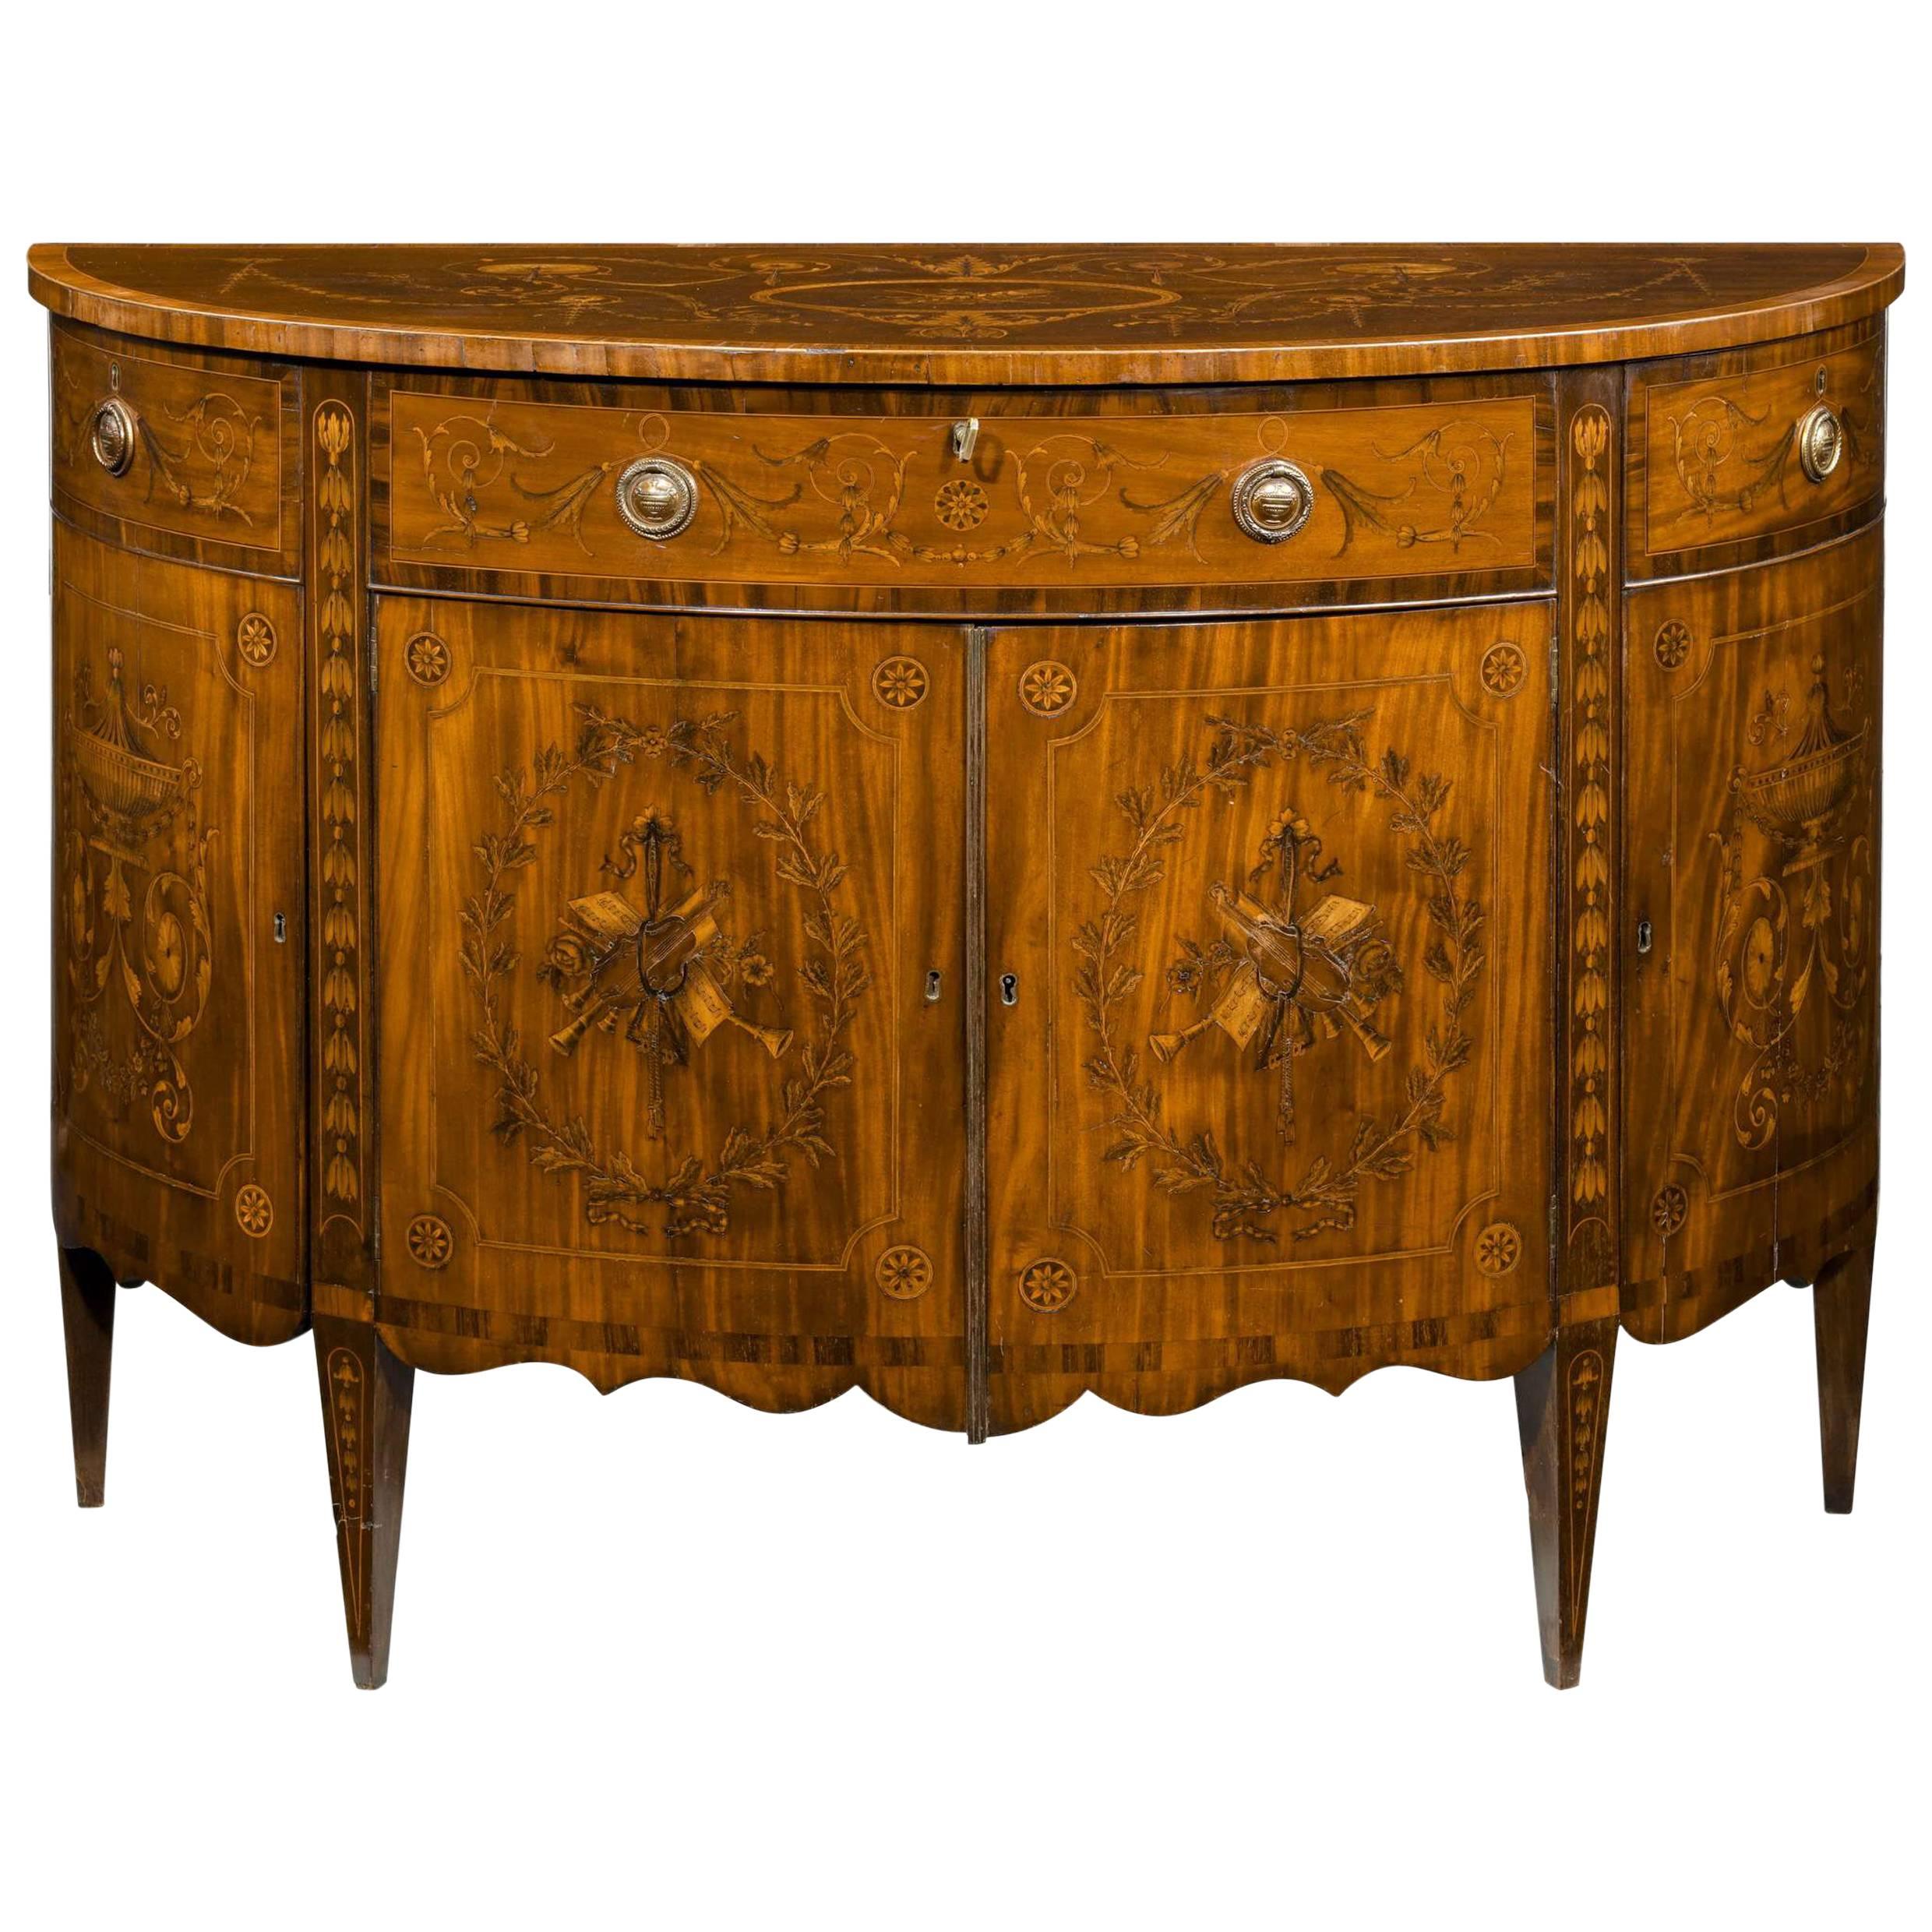 Late 18th Century Marquetry Demilune Commode